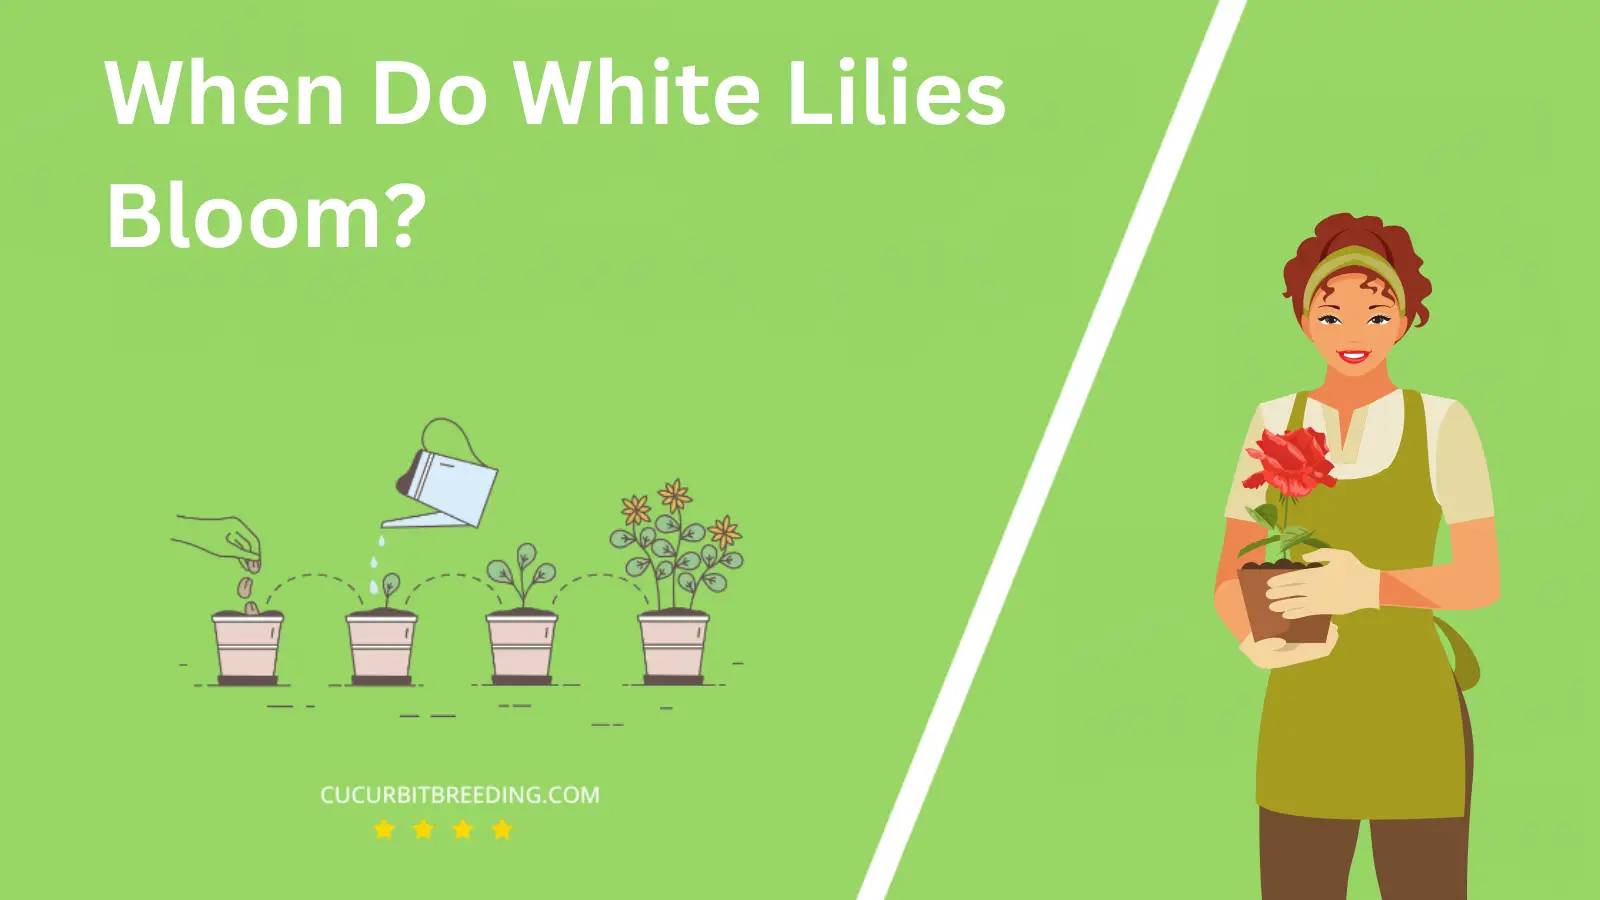 When Do White Lilies Bloom?